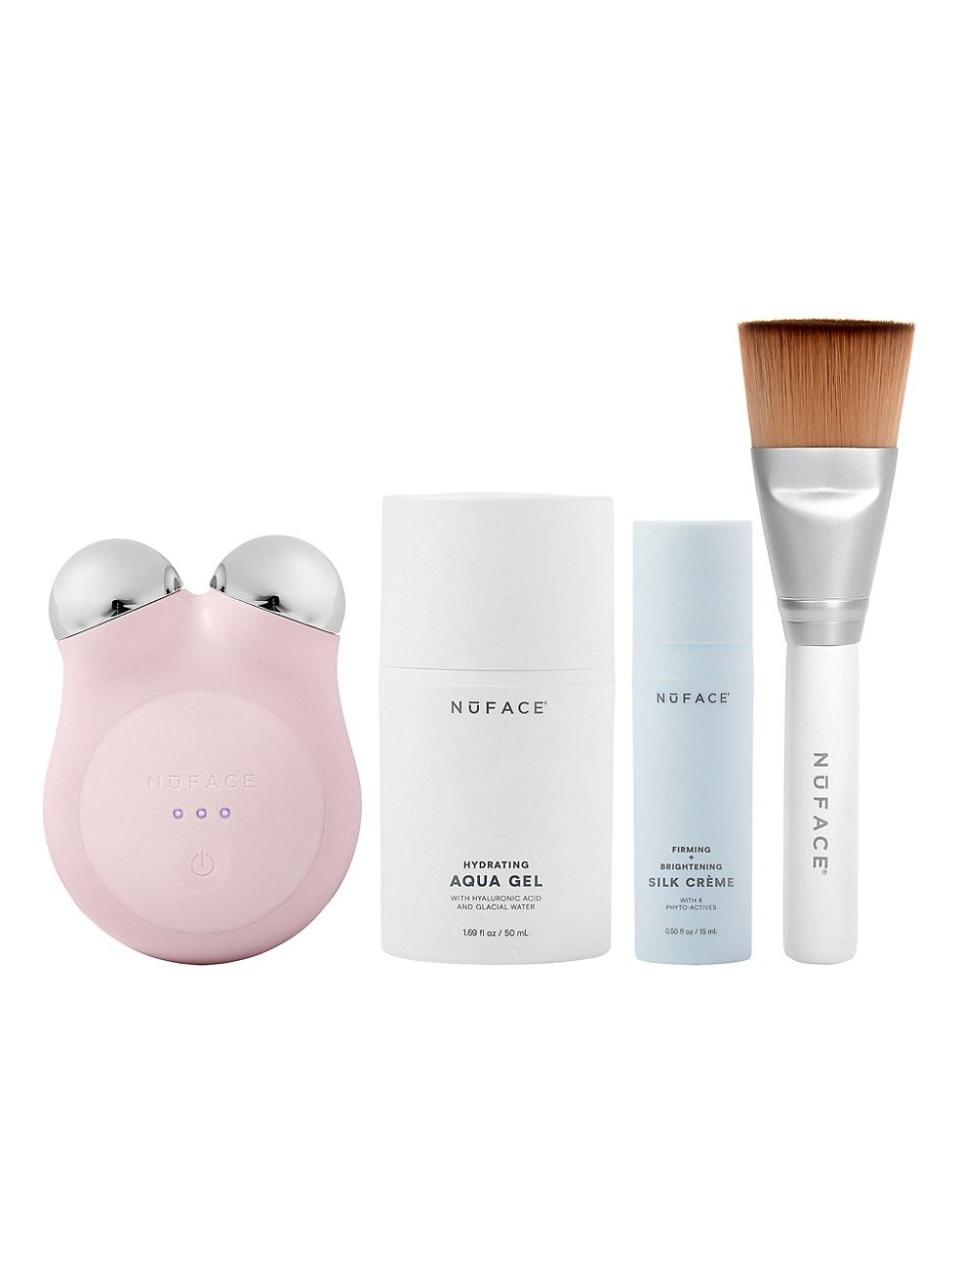 <p><strong>NuFACE</strong></p><p>saksfifthavenue.com</p><p><strong>$208.25</strong></p><p>You'll have everything needed to expertly firm and smooth your complexion at home with this four-piece starter kit from NuFACE, which includes a mini device, aqua gel, firming and brightening cream, and a handy skin brush.</p>